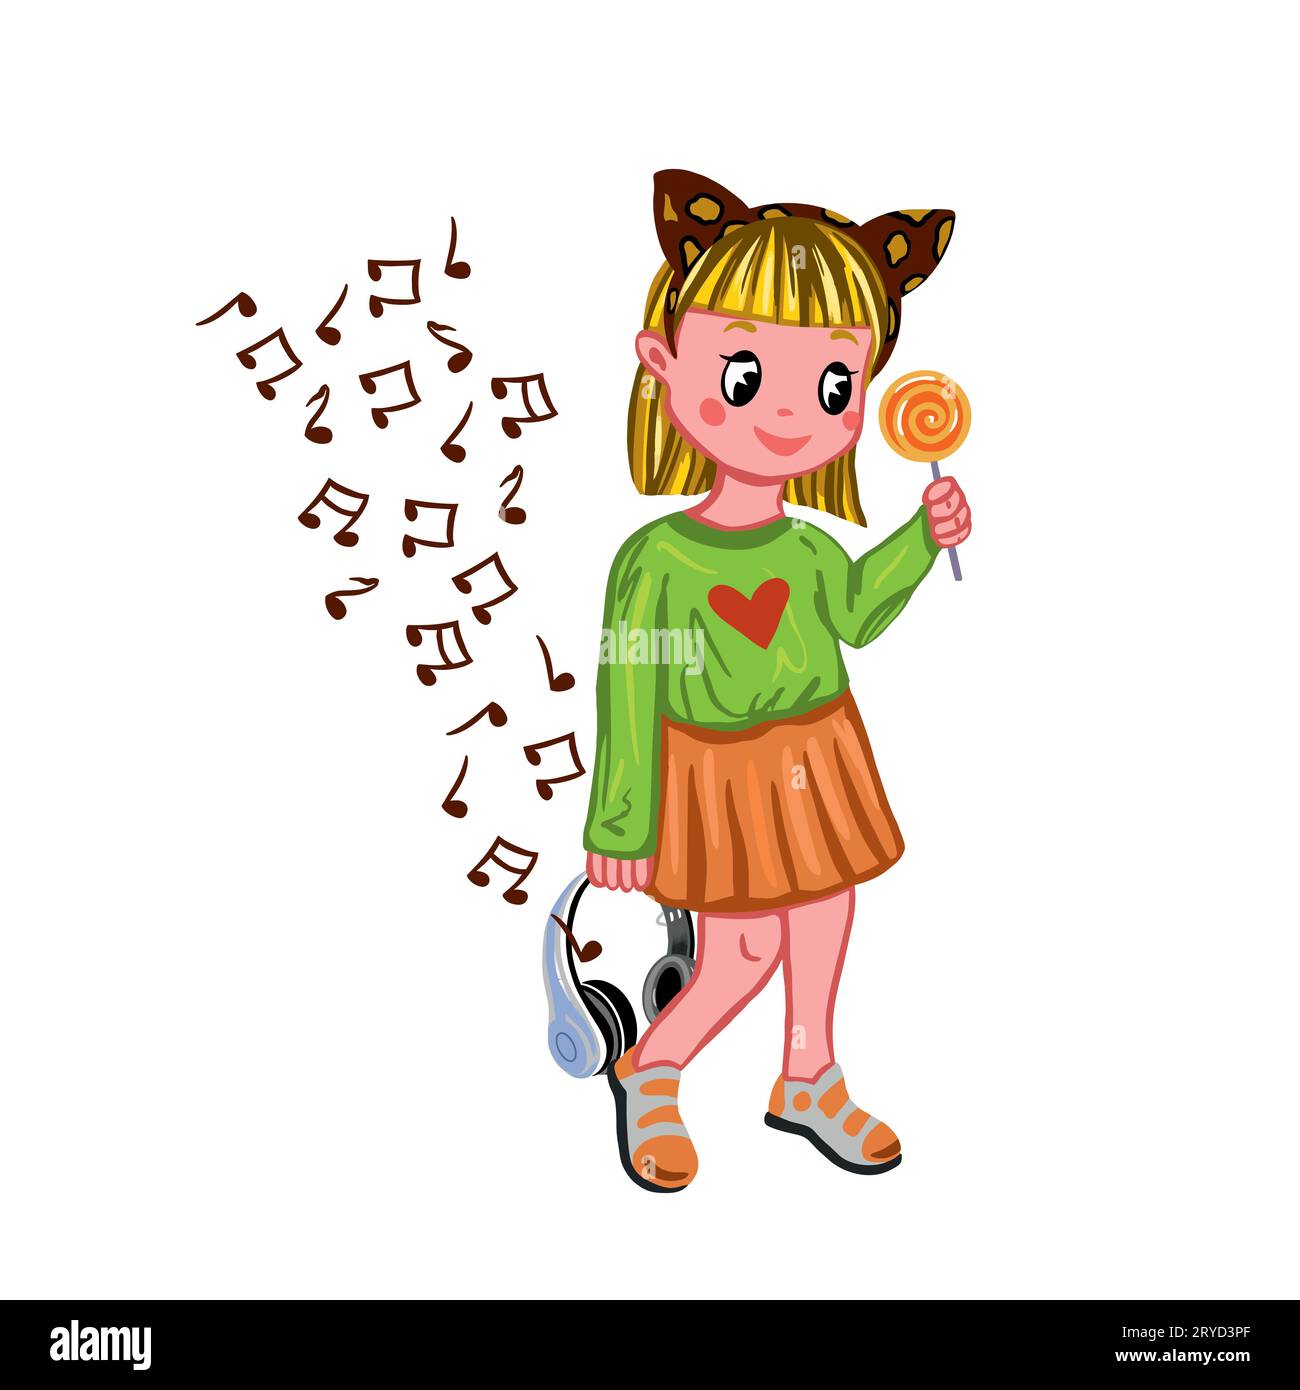 A girl in a headband with ears holding candy in her hands. Vector illustration. Greeting cards, invitations, posters, banners, book illustrations. Stock Vector